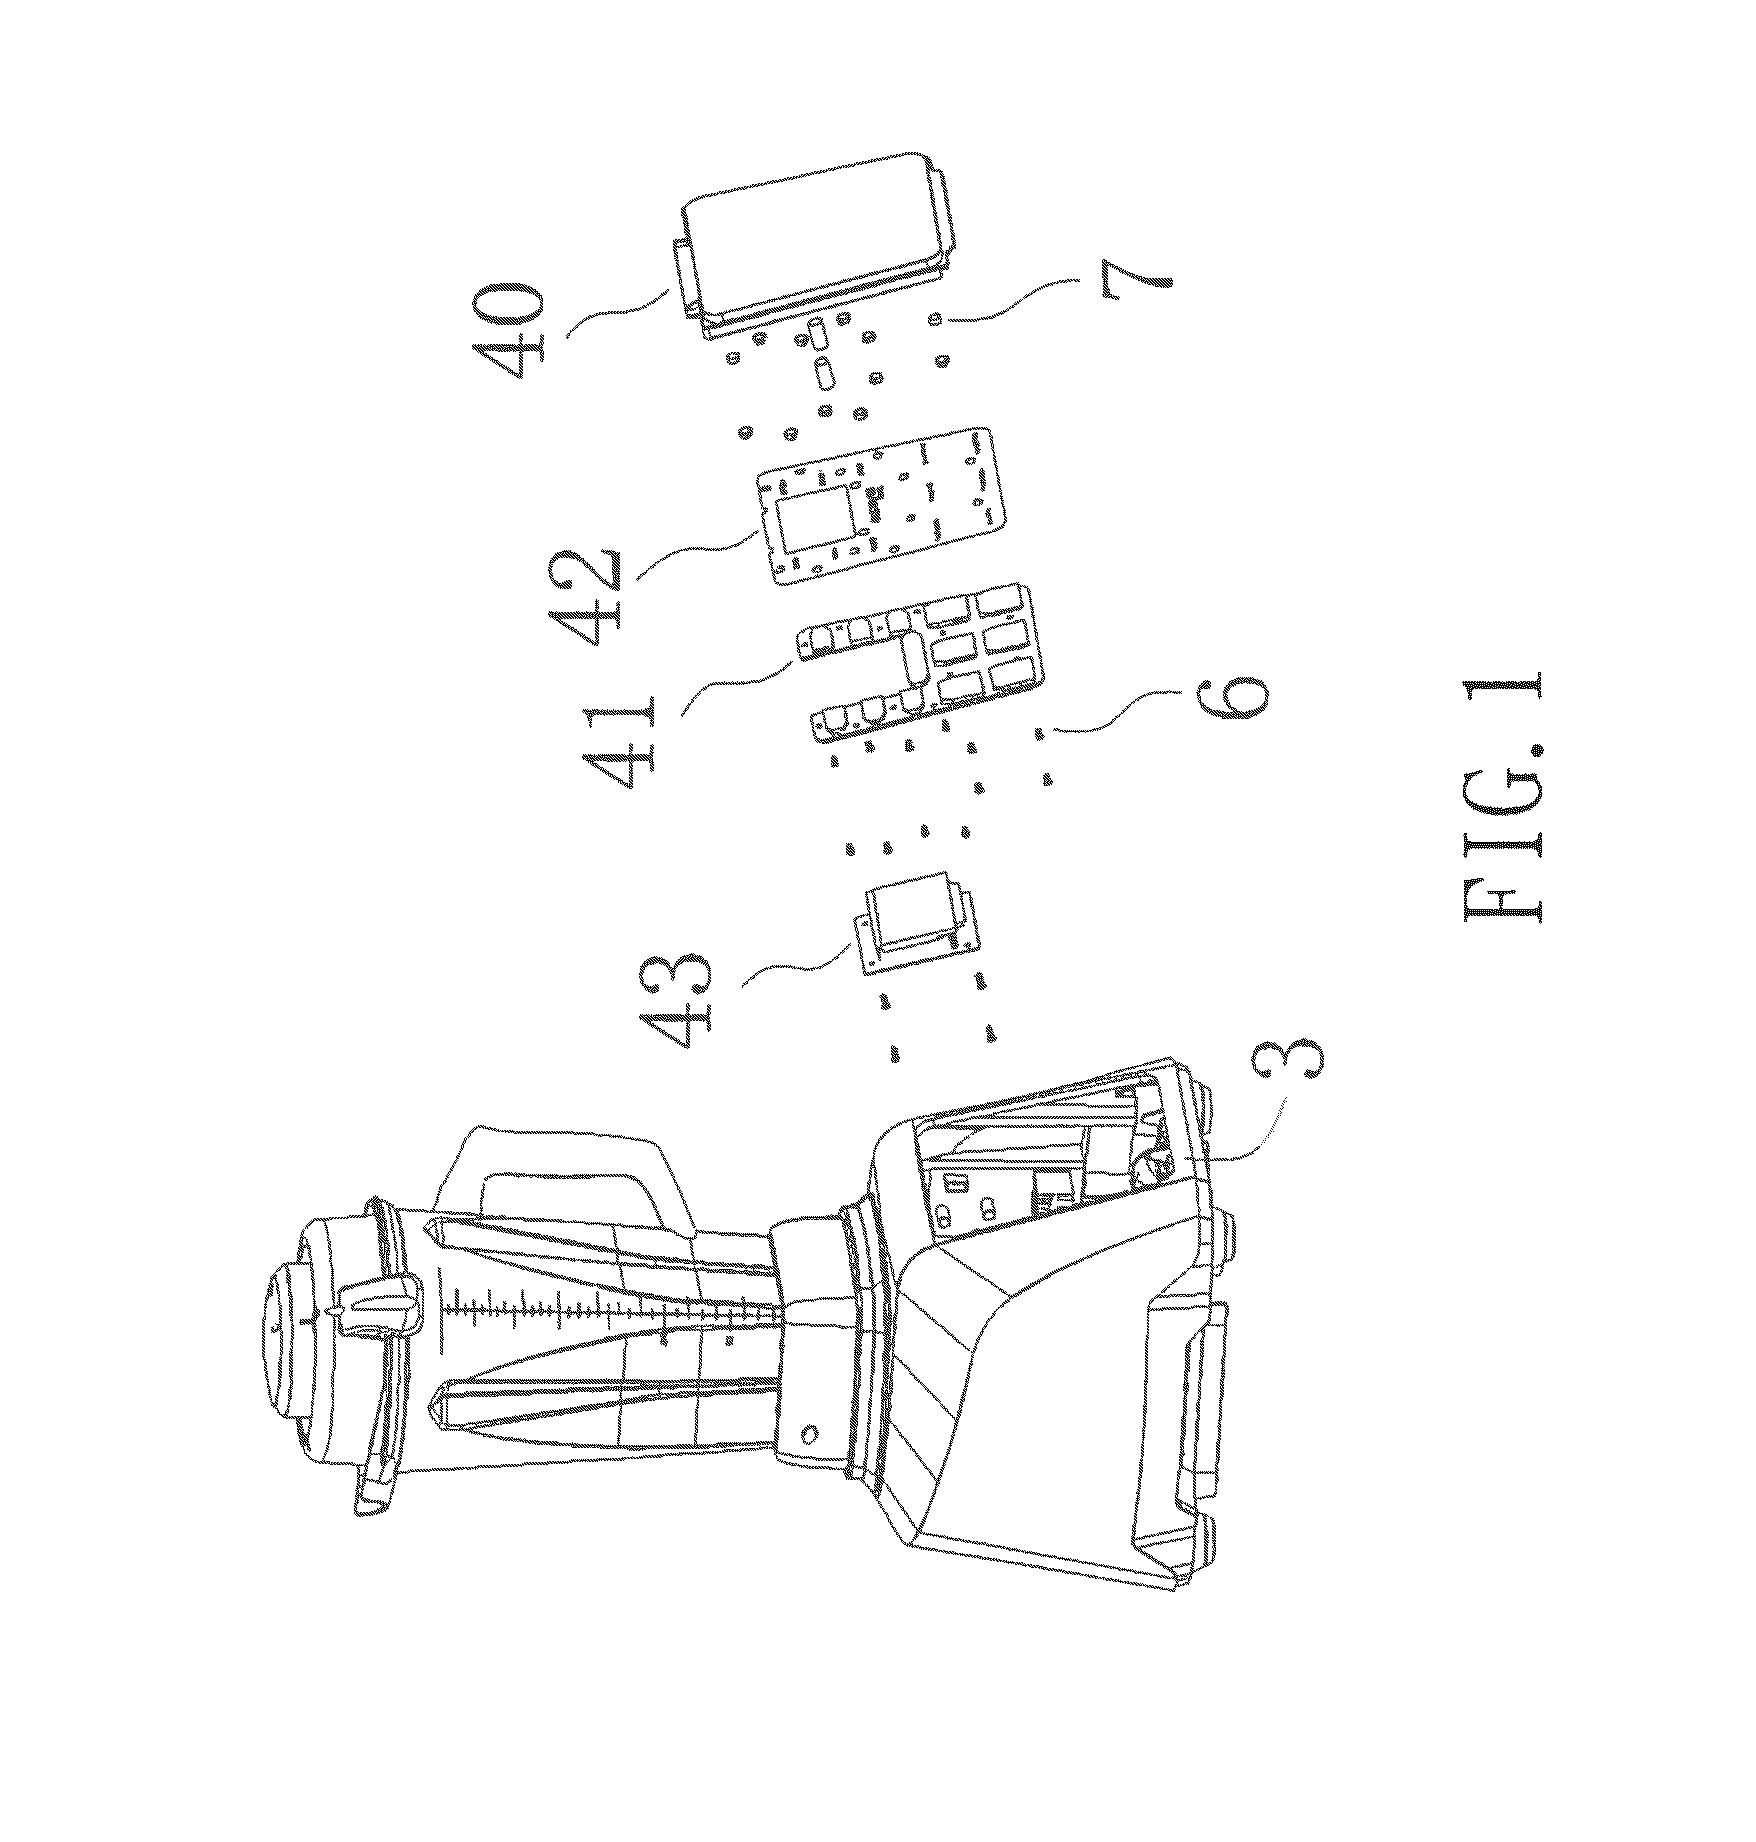 Food processor having touch button device